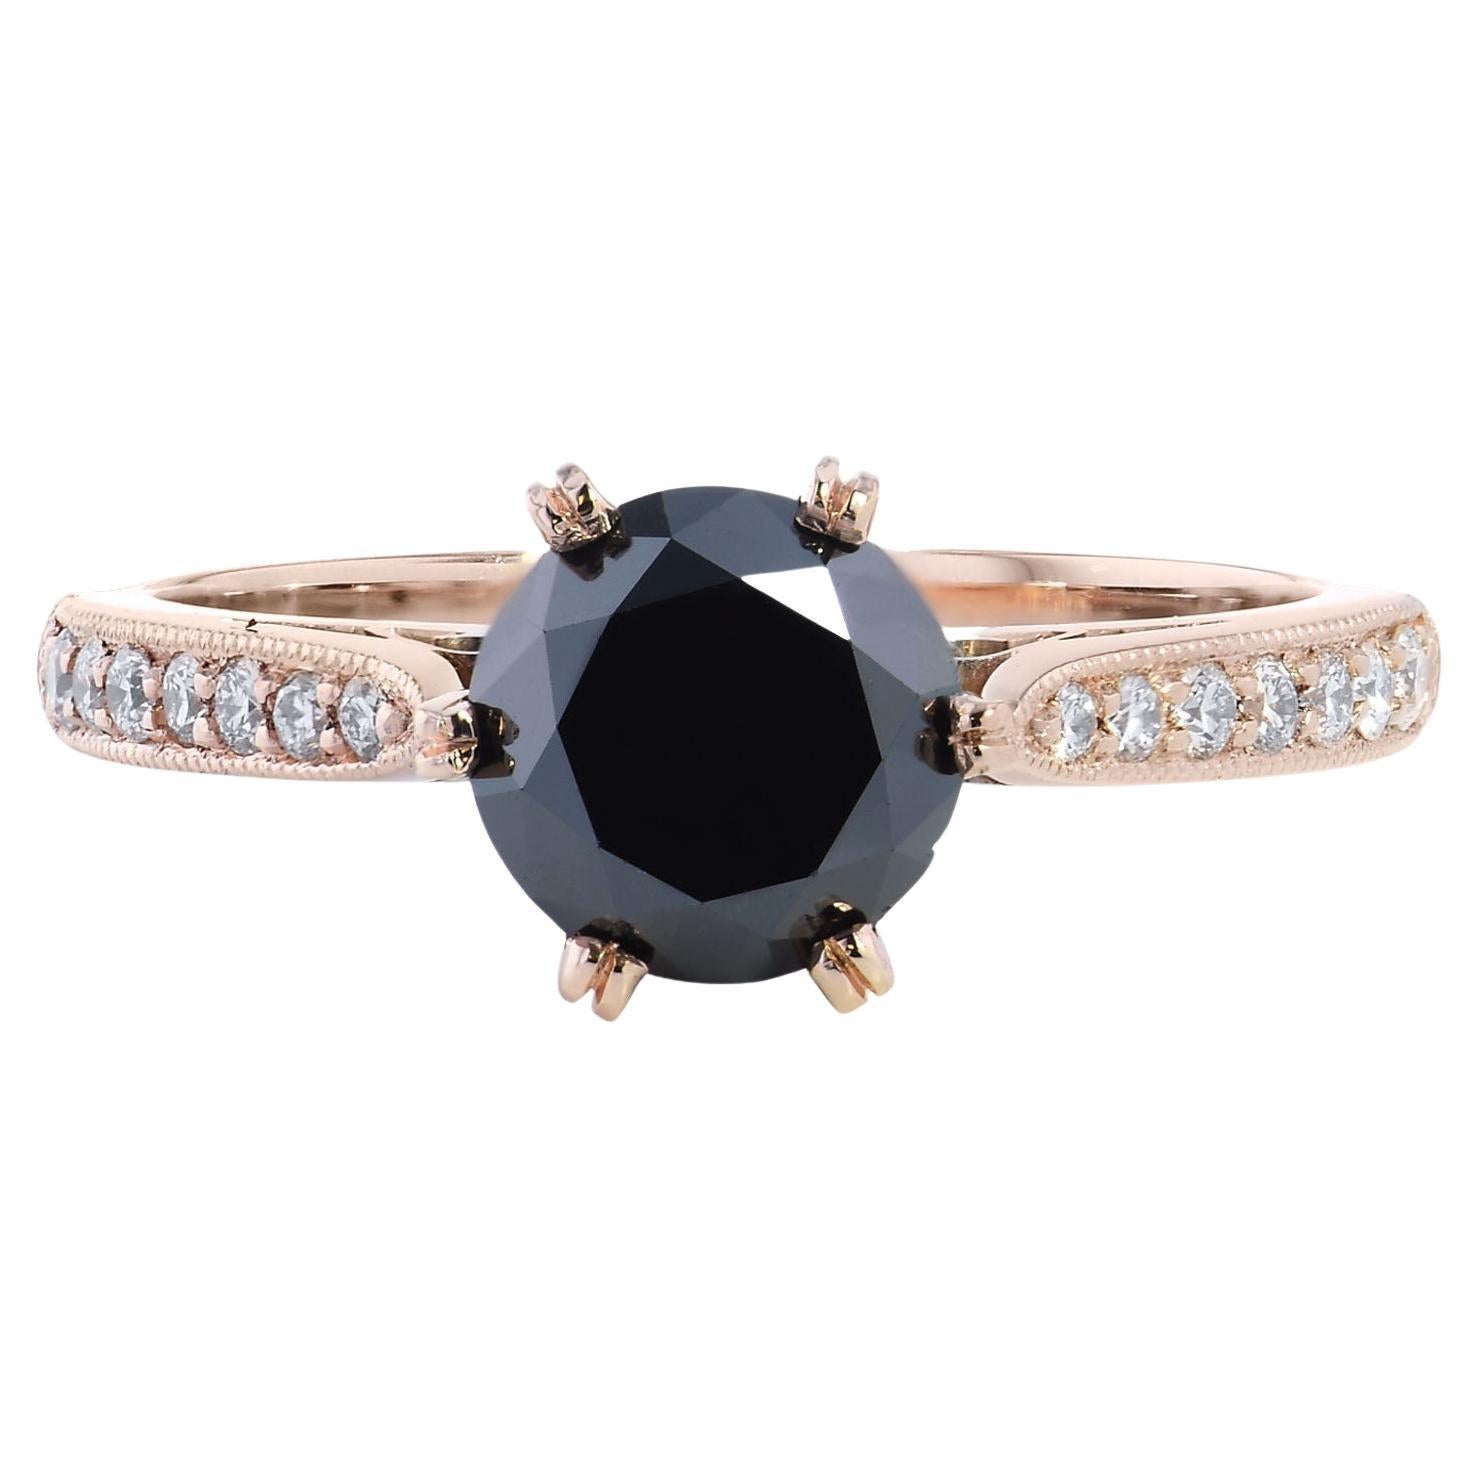 Are Black Diamonds good for engagement rings?